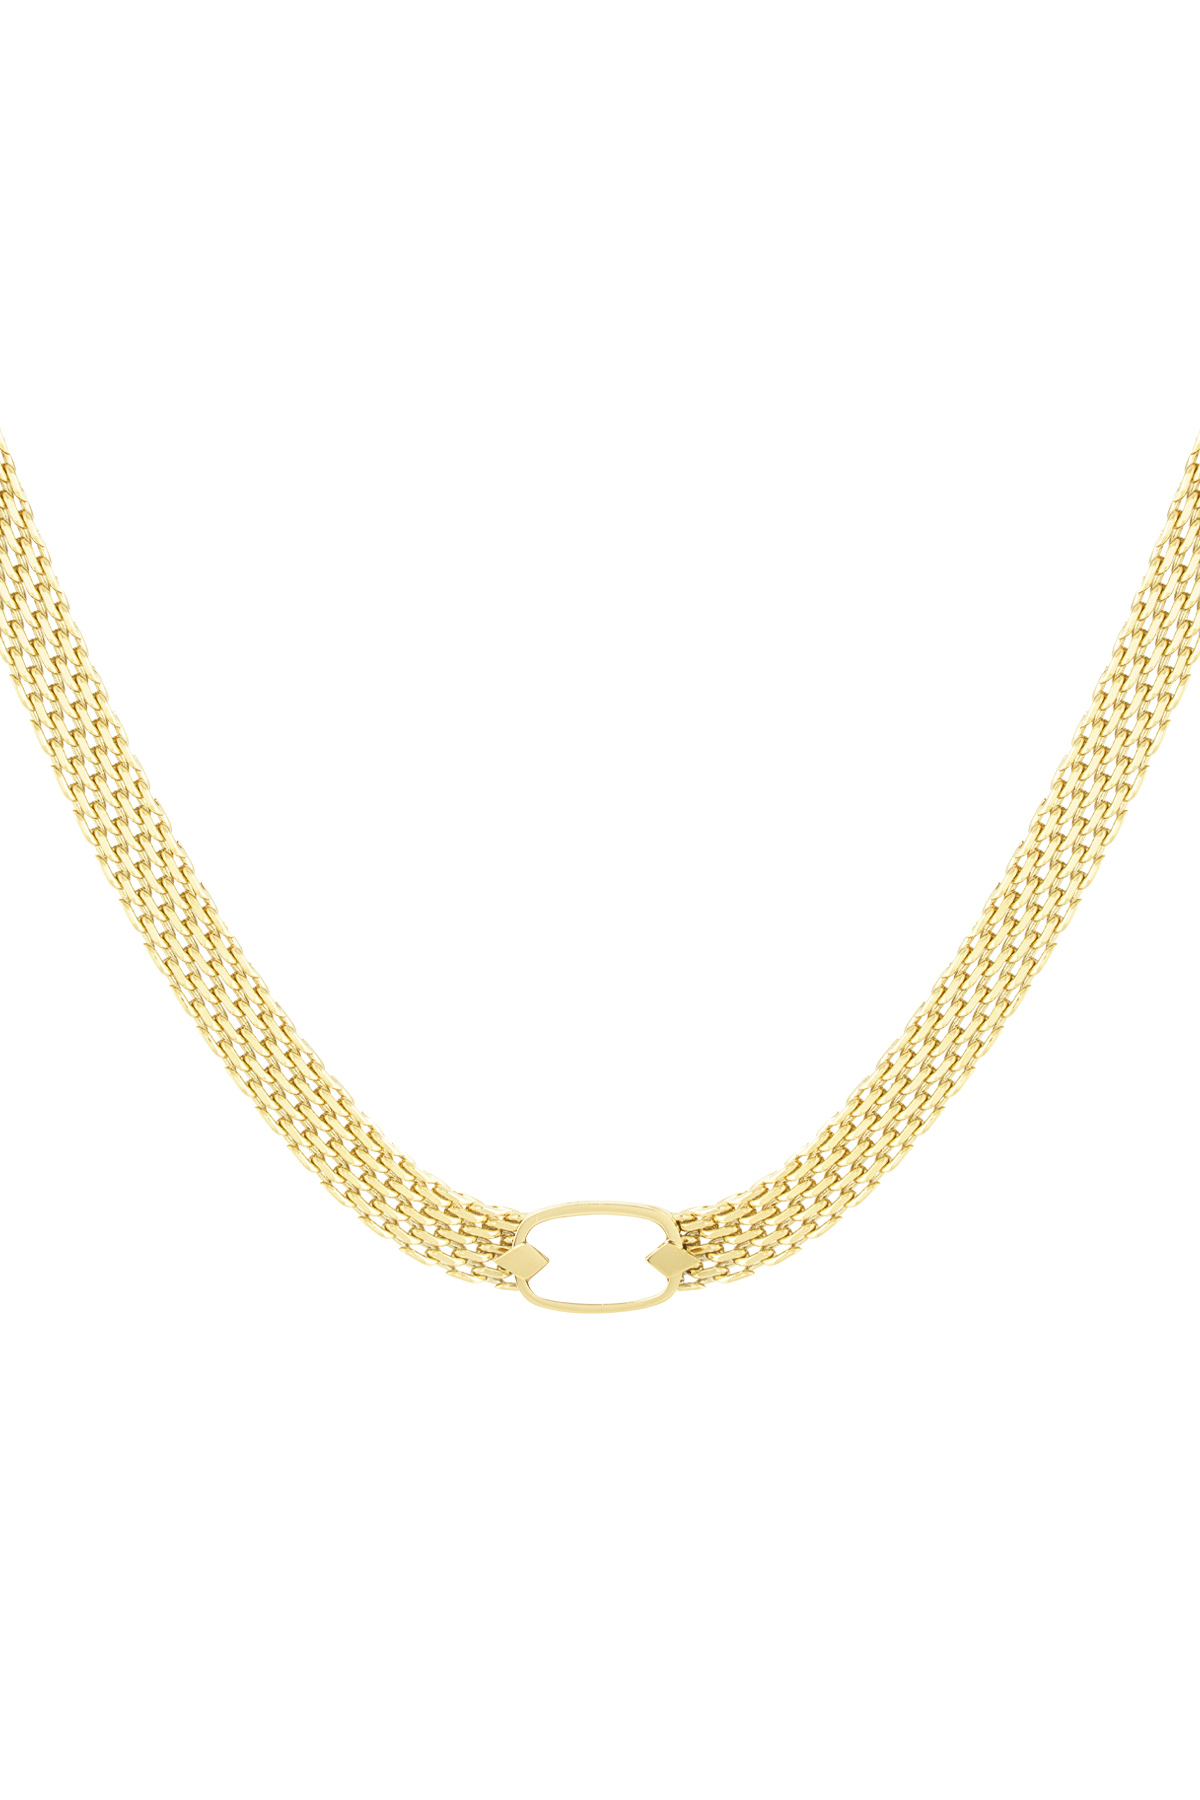 Flat links necklace - gold